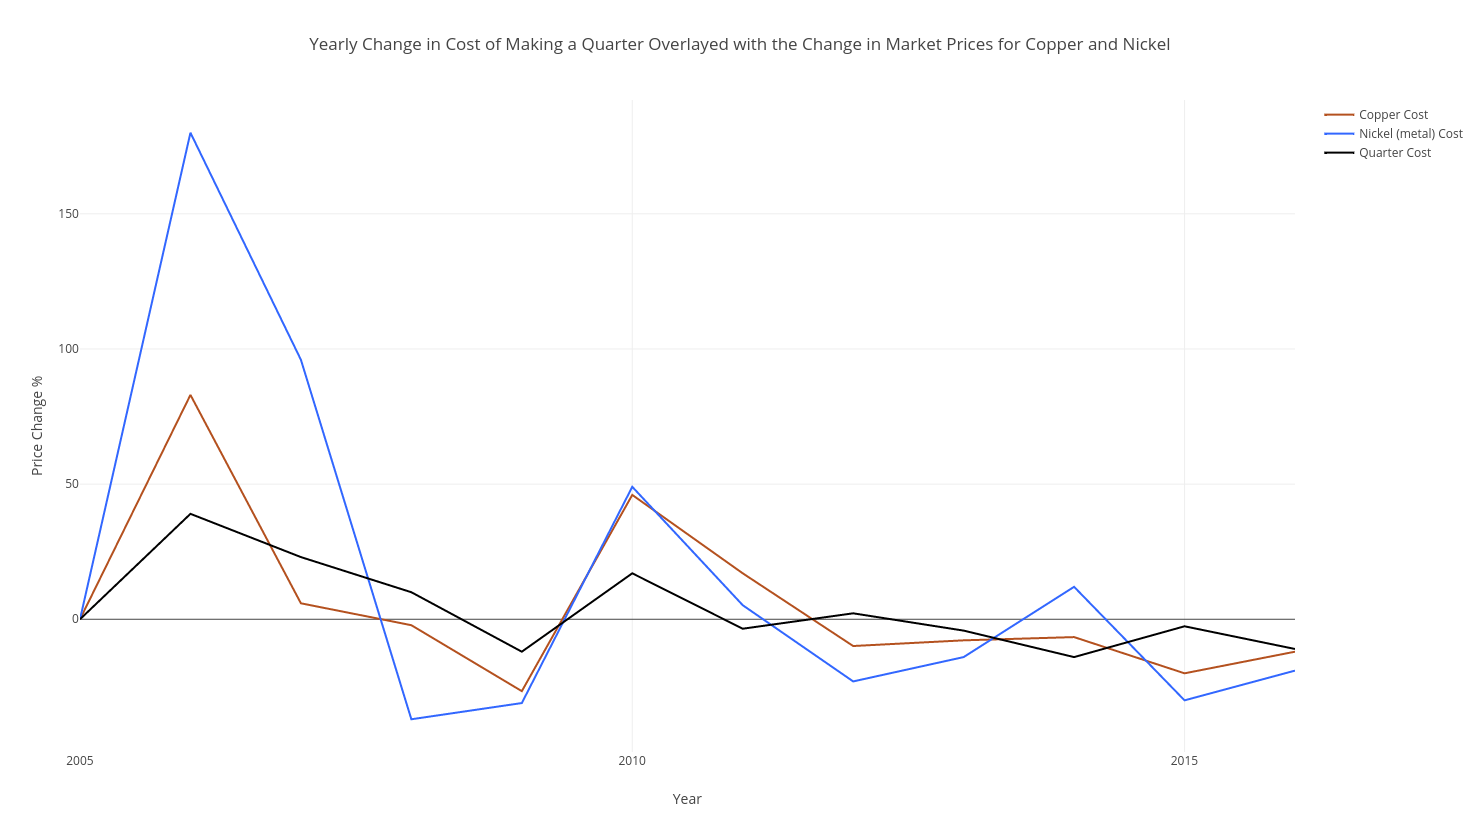 The yearly price change in making a quarter compared to yearly changes in nickel and copper